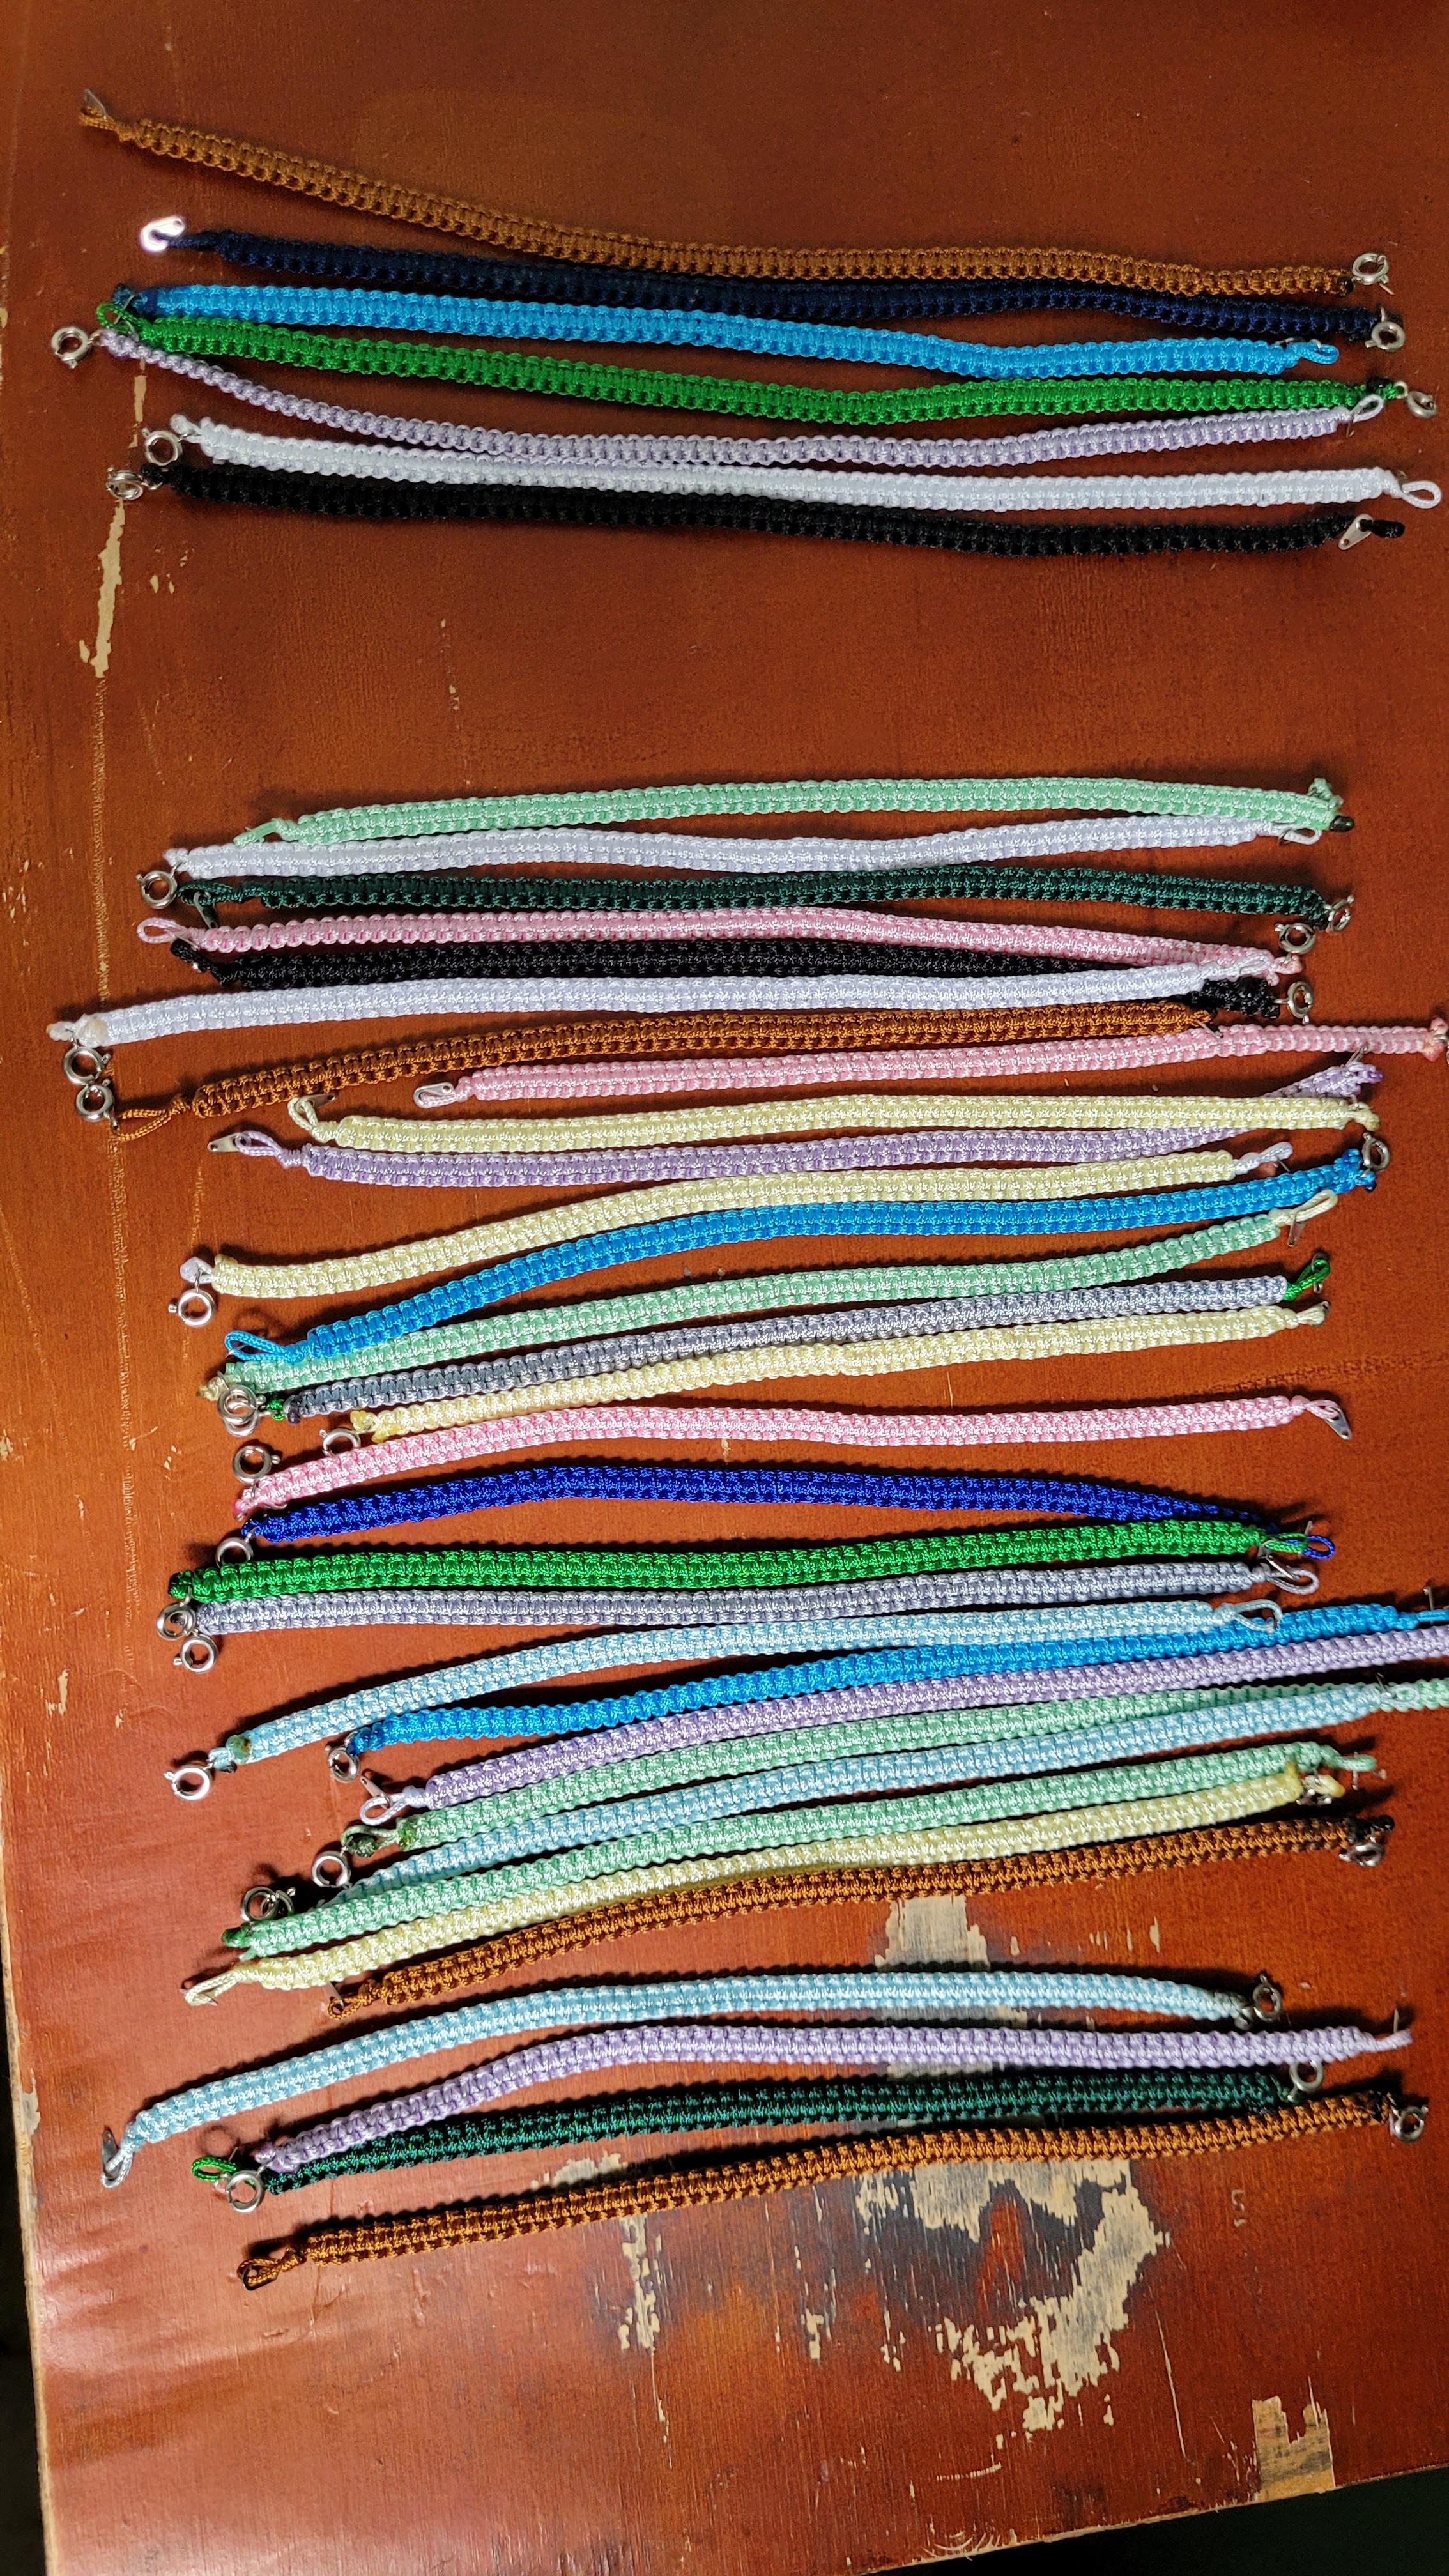 I made lots of bracelets - gift for my colleagues when I am leaving